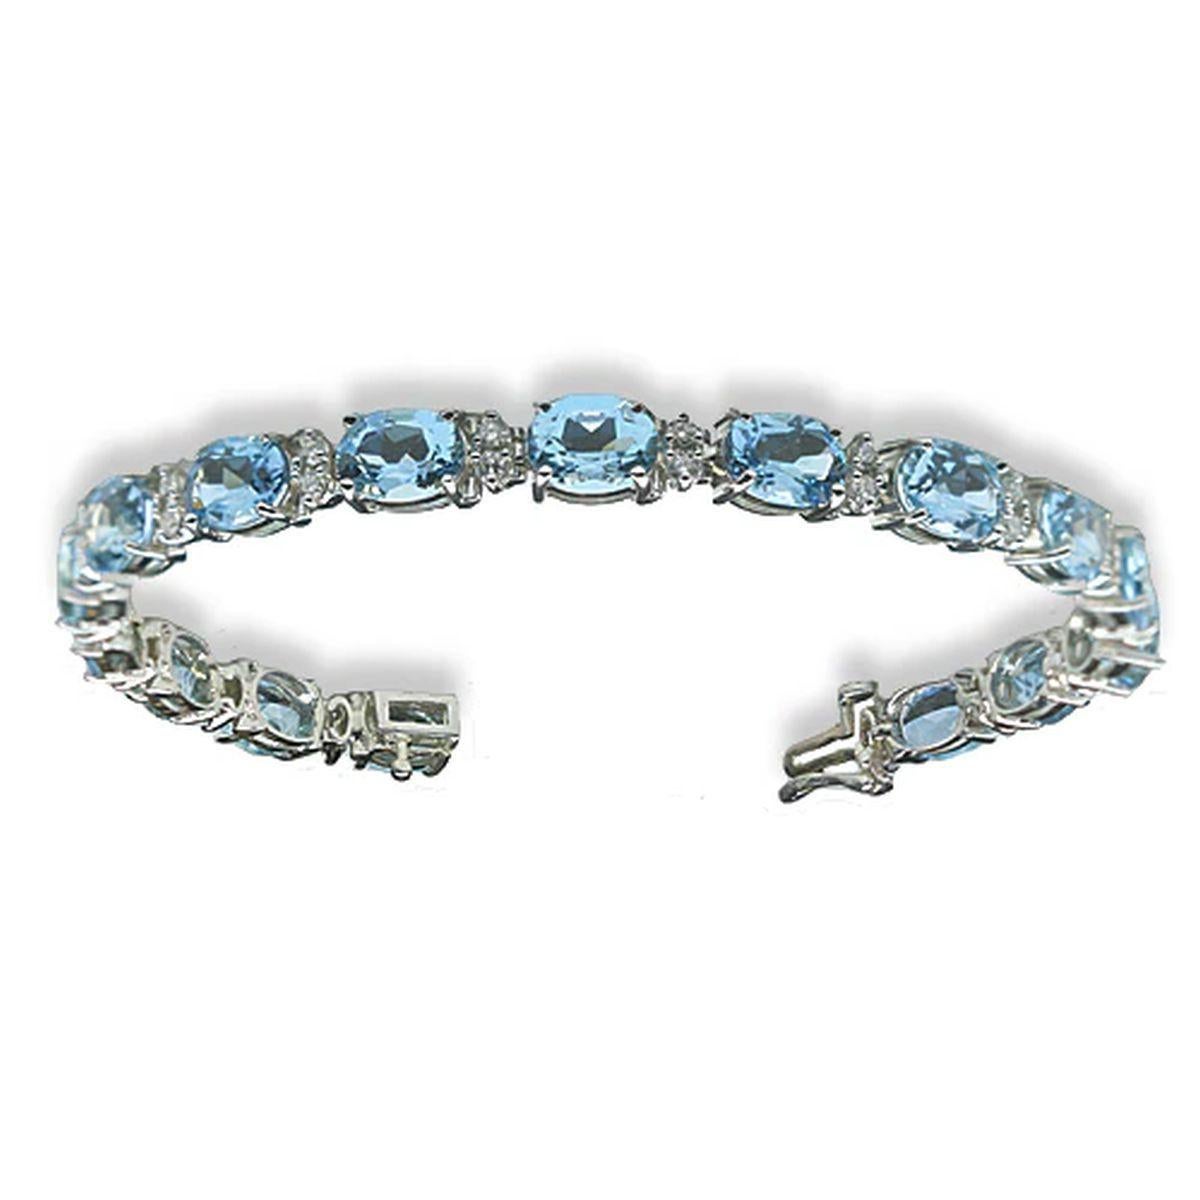 Simply Beautiful! Elegant and finely detailed Vintage Oscar Worthy Deep Intense Blue Aquamarine and Diamond Gold Bracelet. Hand set with 16 Oval Aquamarine I/F High Quality Gemstones, weighing approx. 17.96tcw. Inter-spaced with Round Brilliant-cut